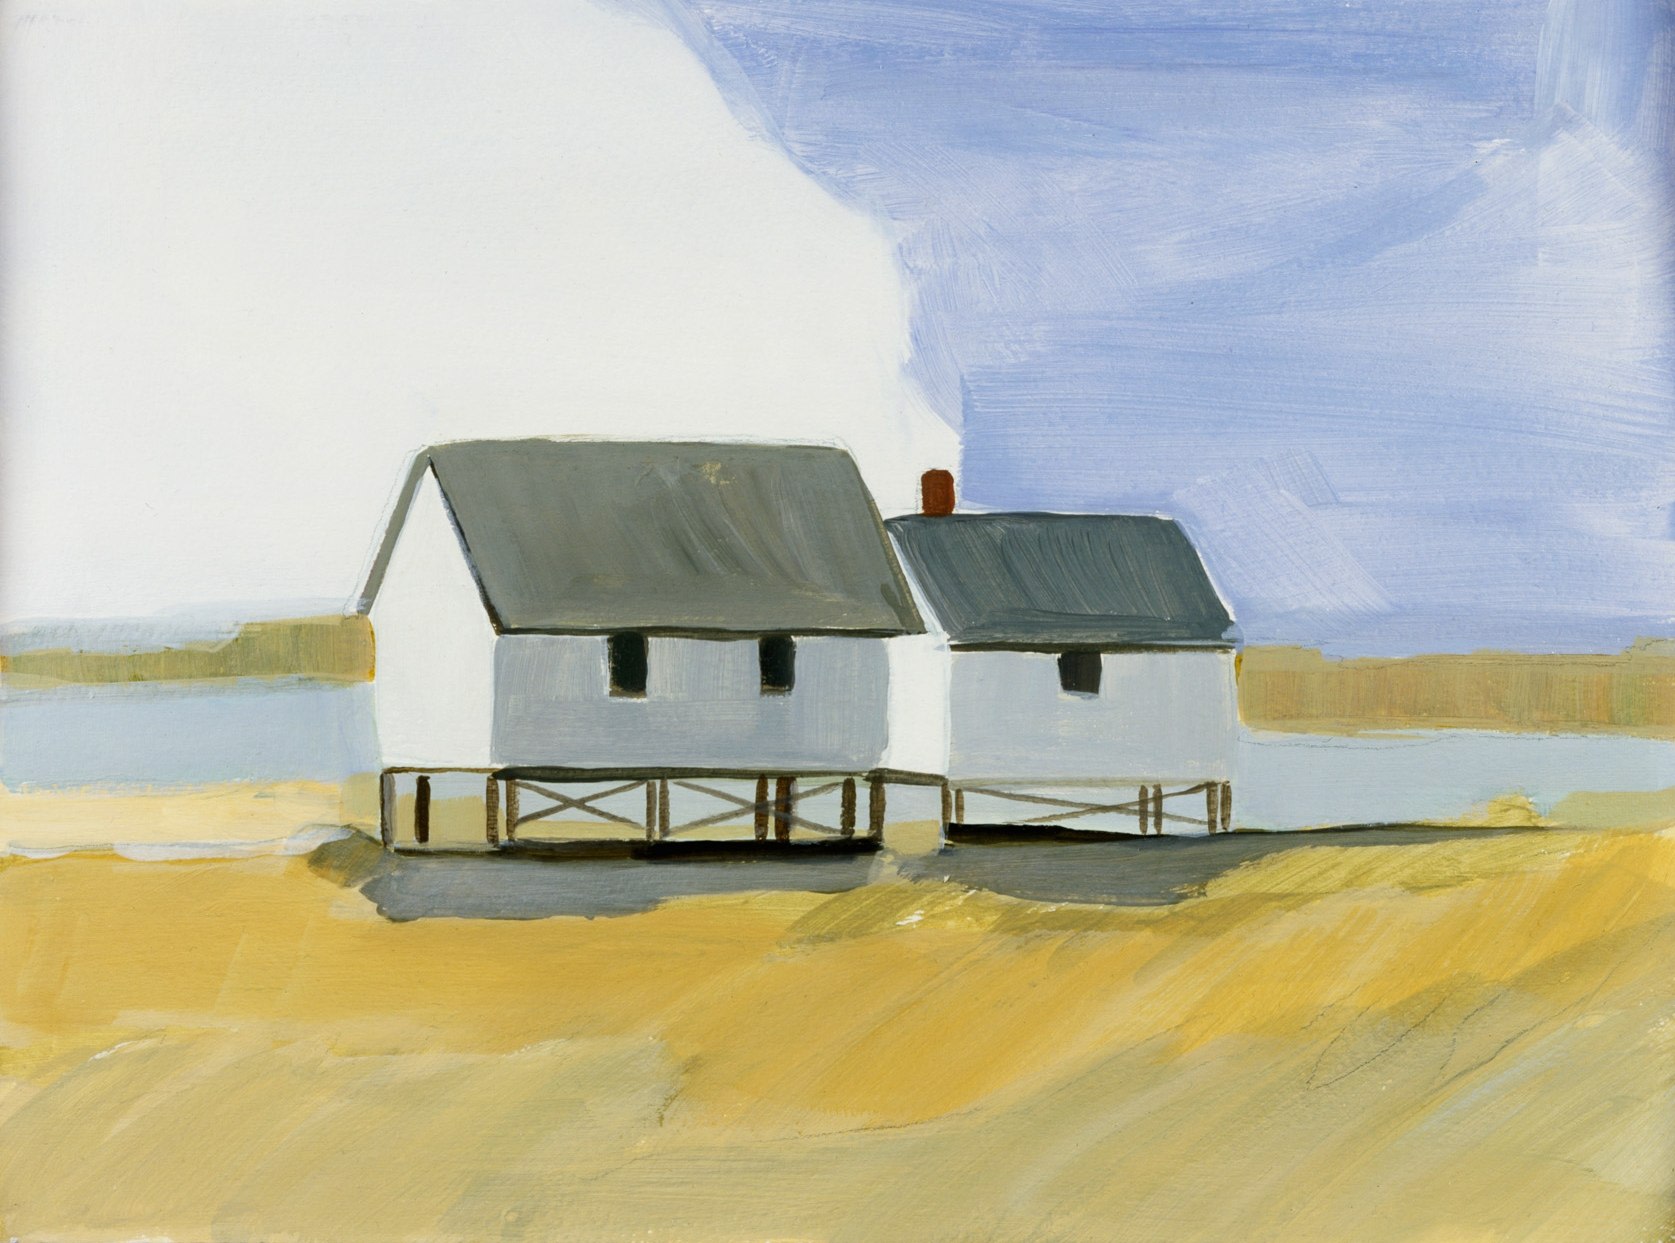 Maureen Gallace, Untitled, 2003